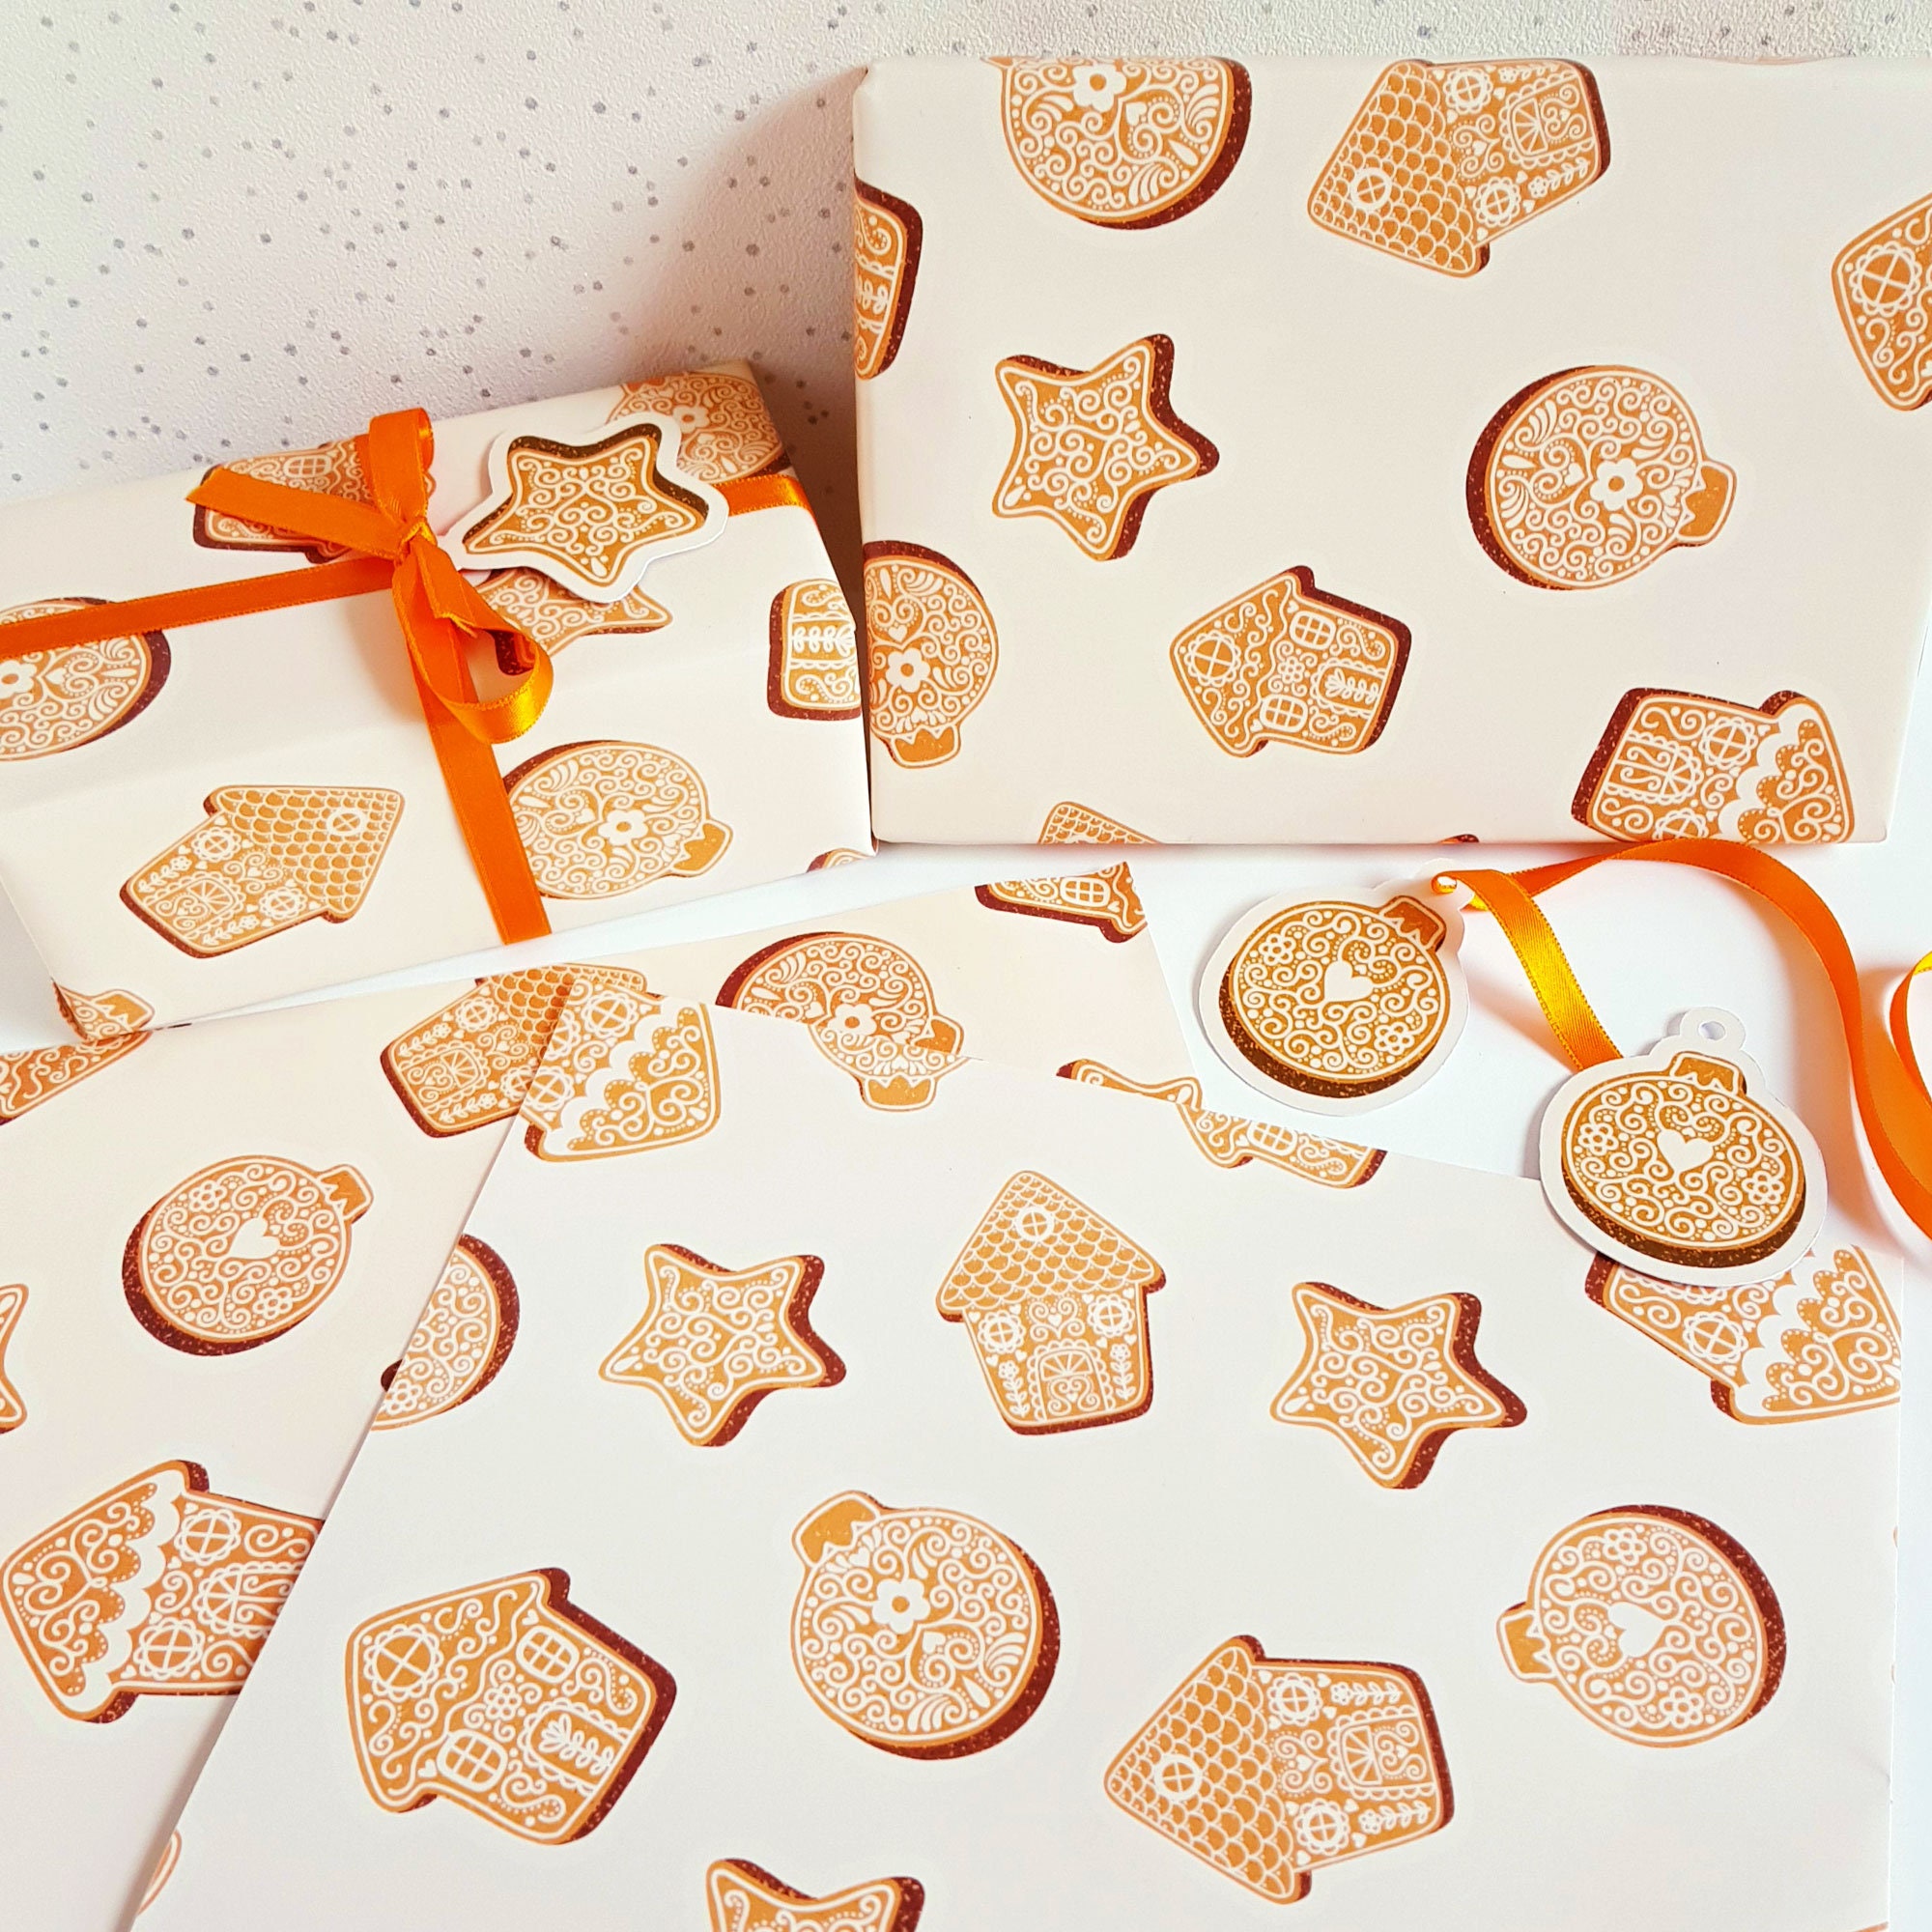 Gingerbread House Wrapping Paper Cozy Weather Gift Wrap Girl Wrapping Paper  Secret Santa Wrapping Paper Gift Wrap Christmas Tree 